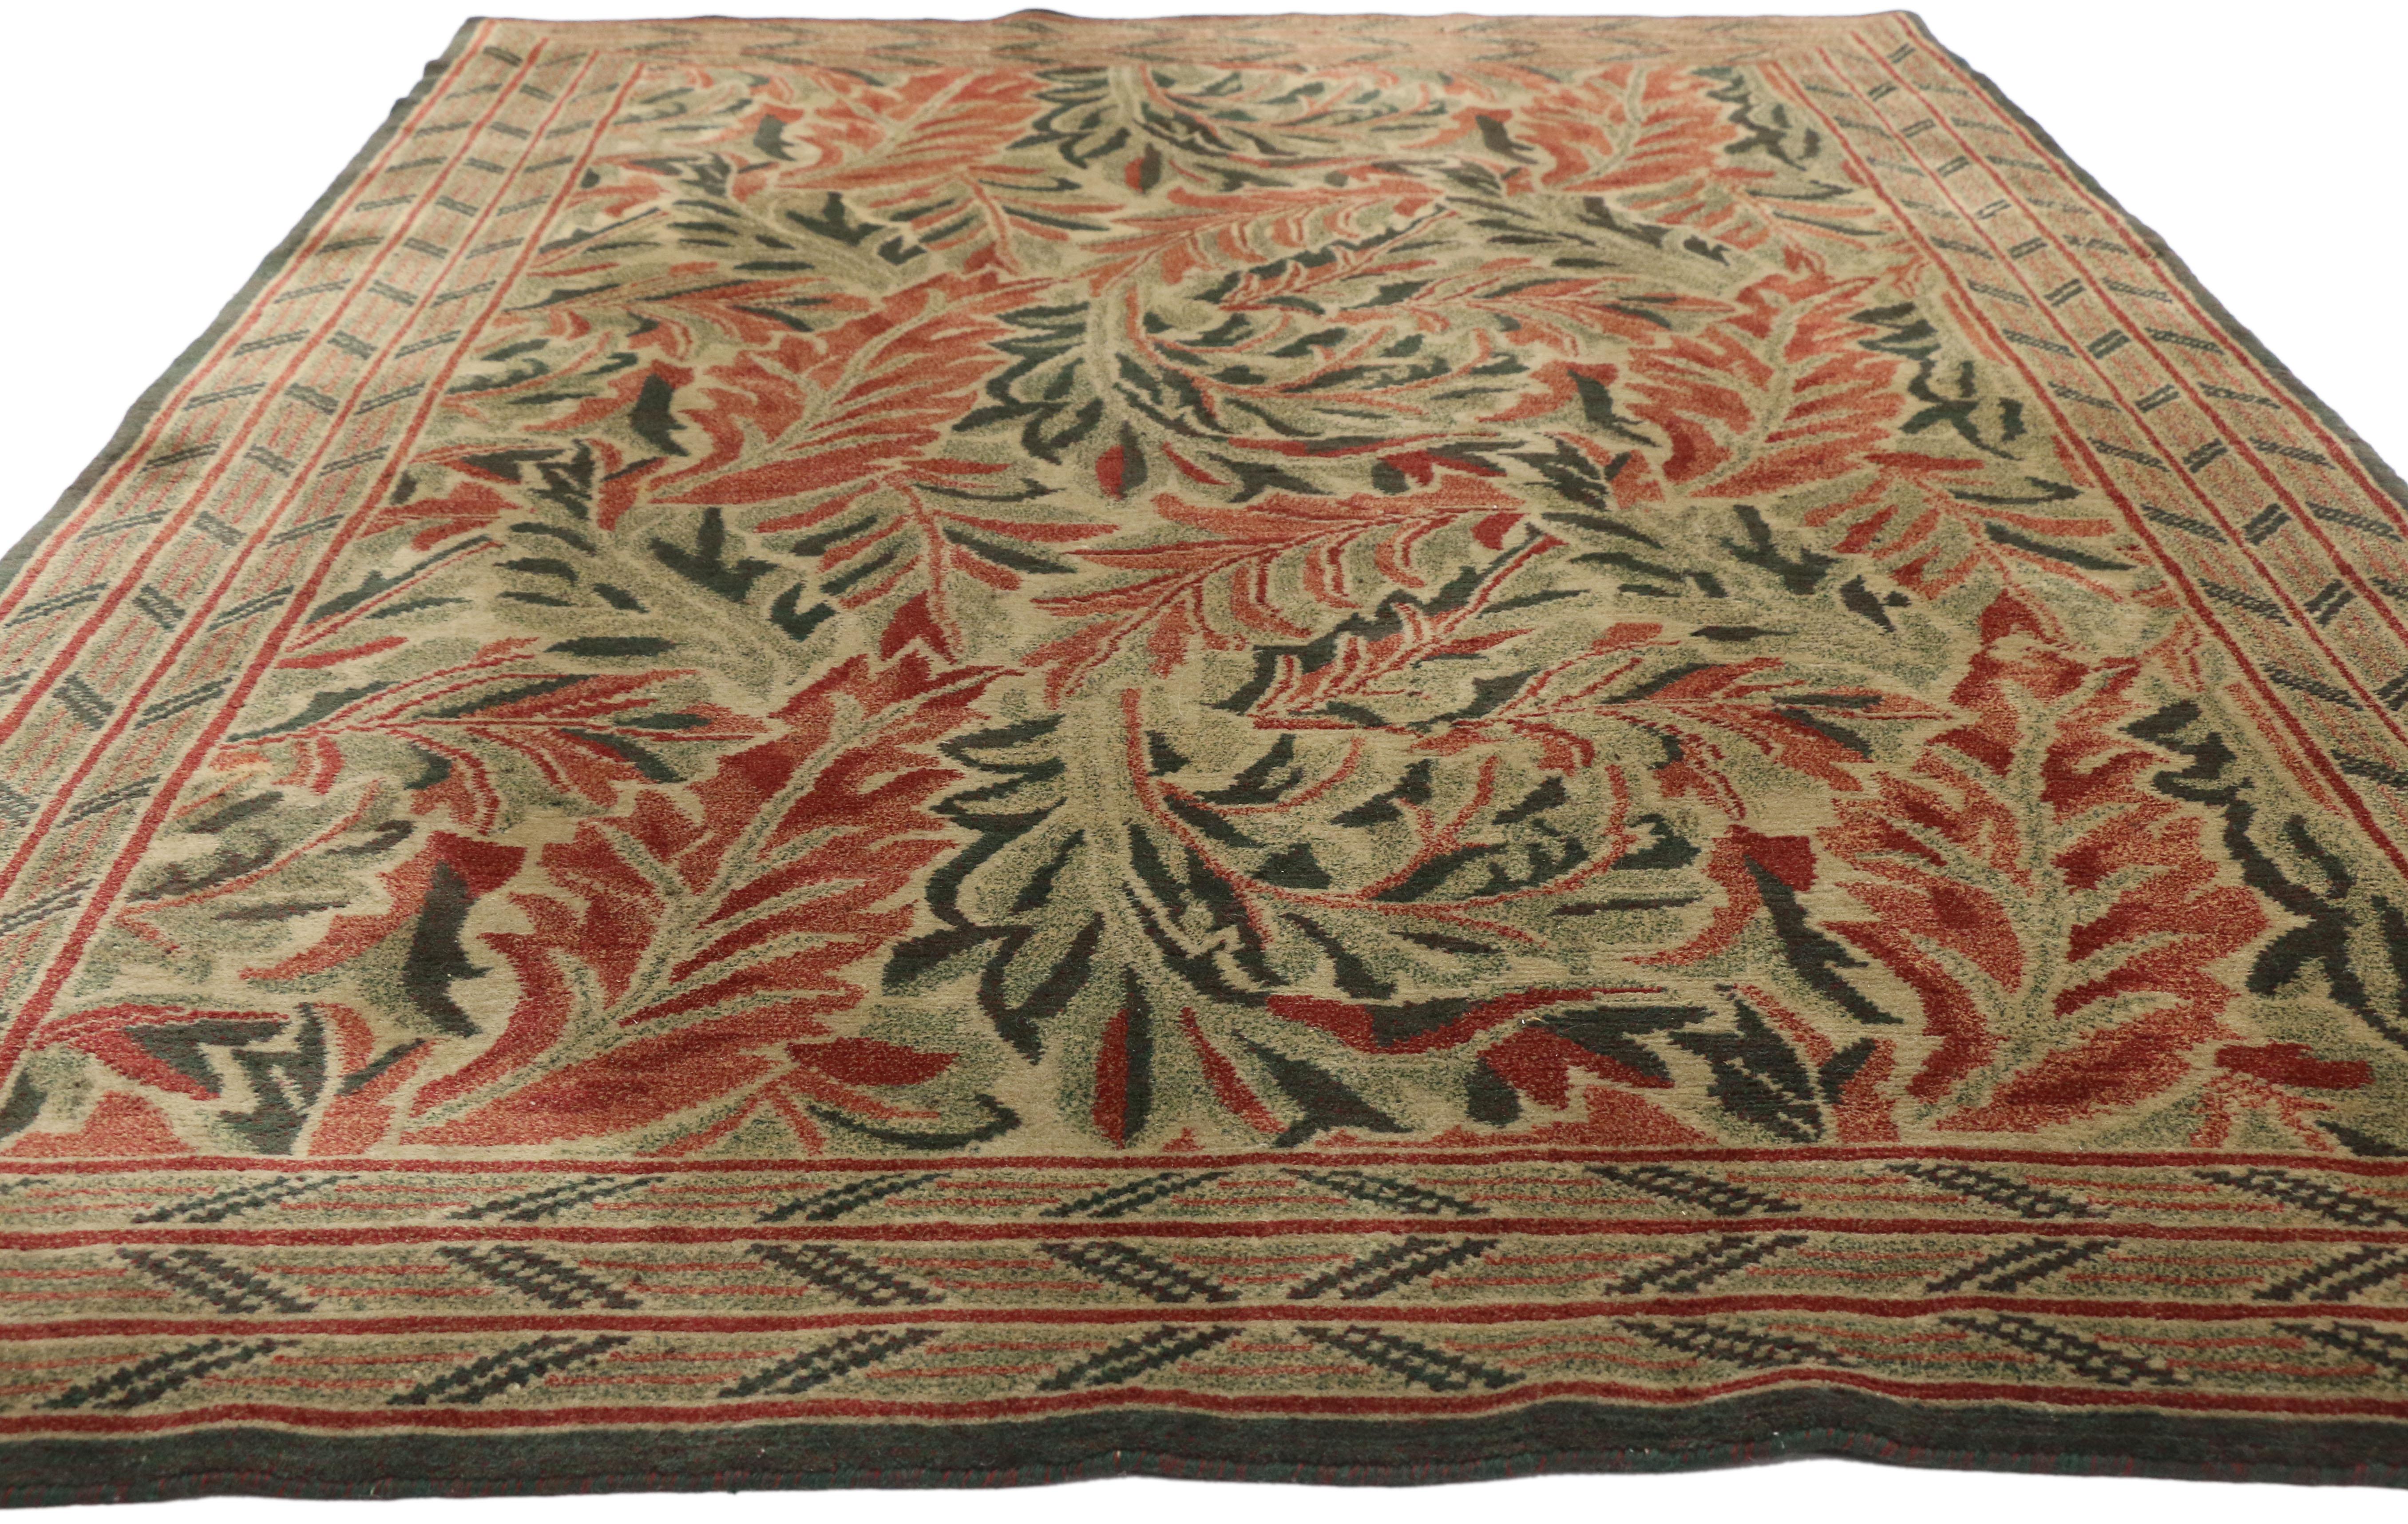 Arts and Crafts Vintage Swedish William Morris Acanthus Inspired Rug with Arts & Crafts Style